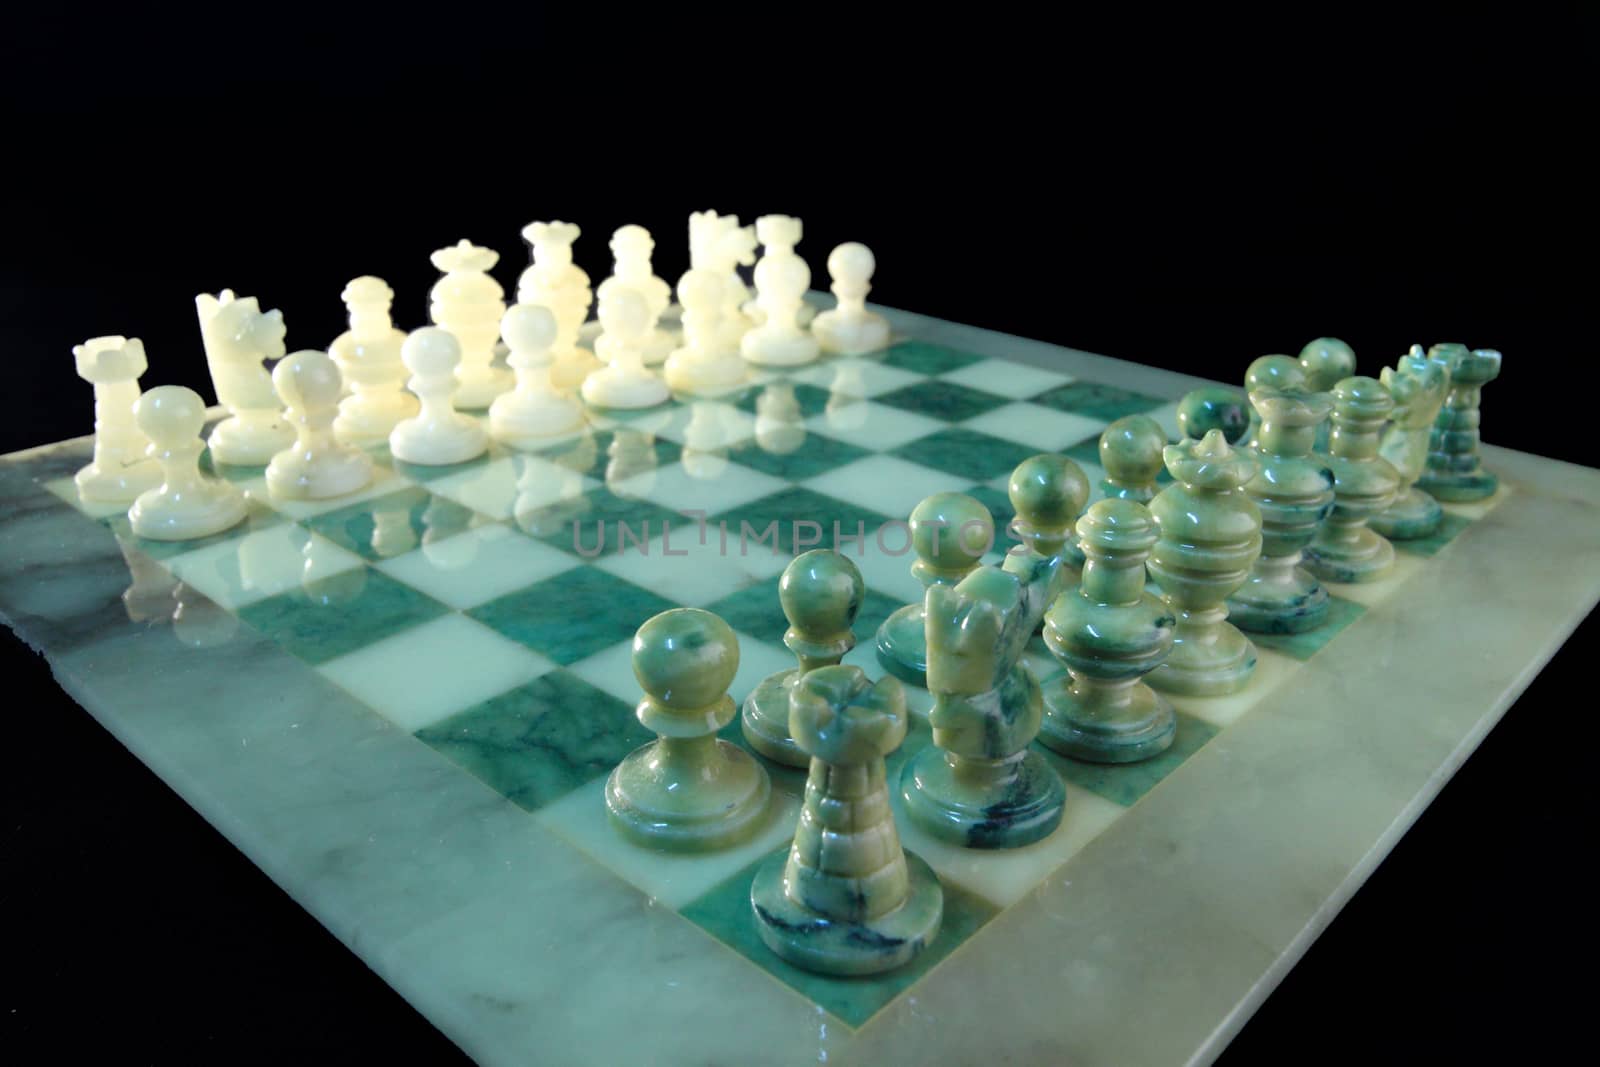 chessboard and alabaster chess l by diecidodici